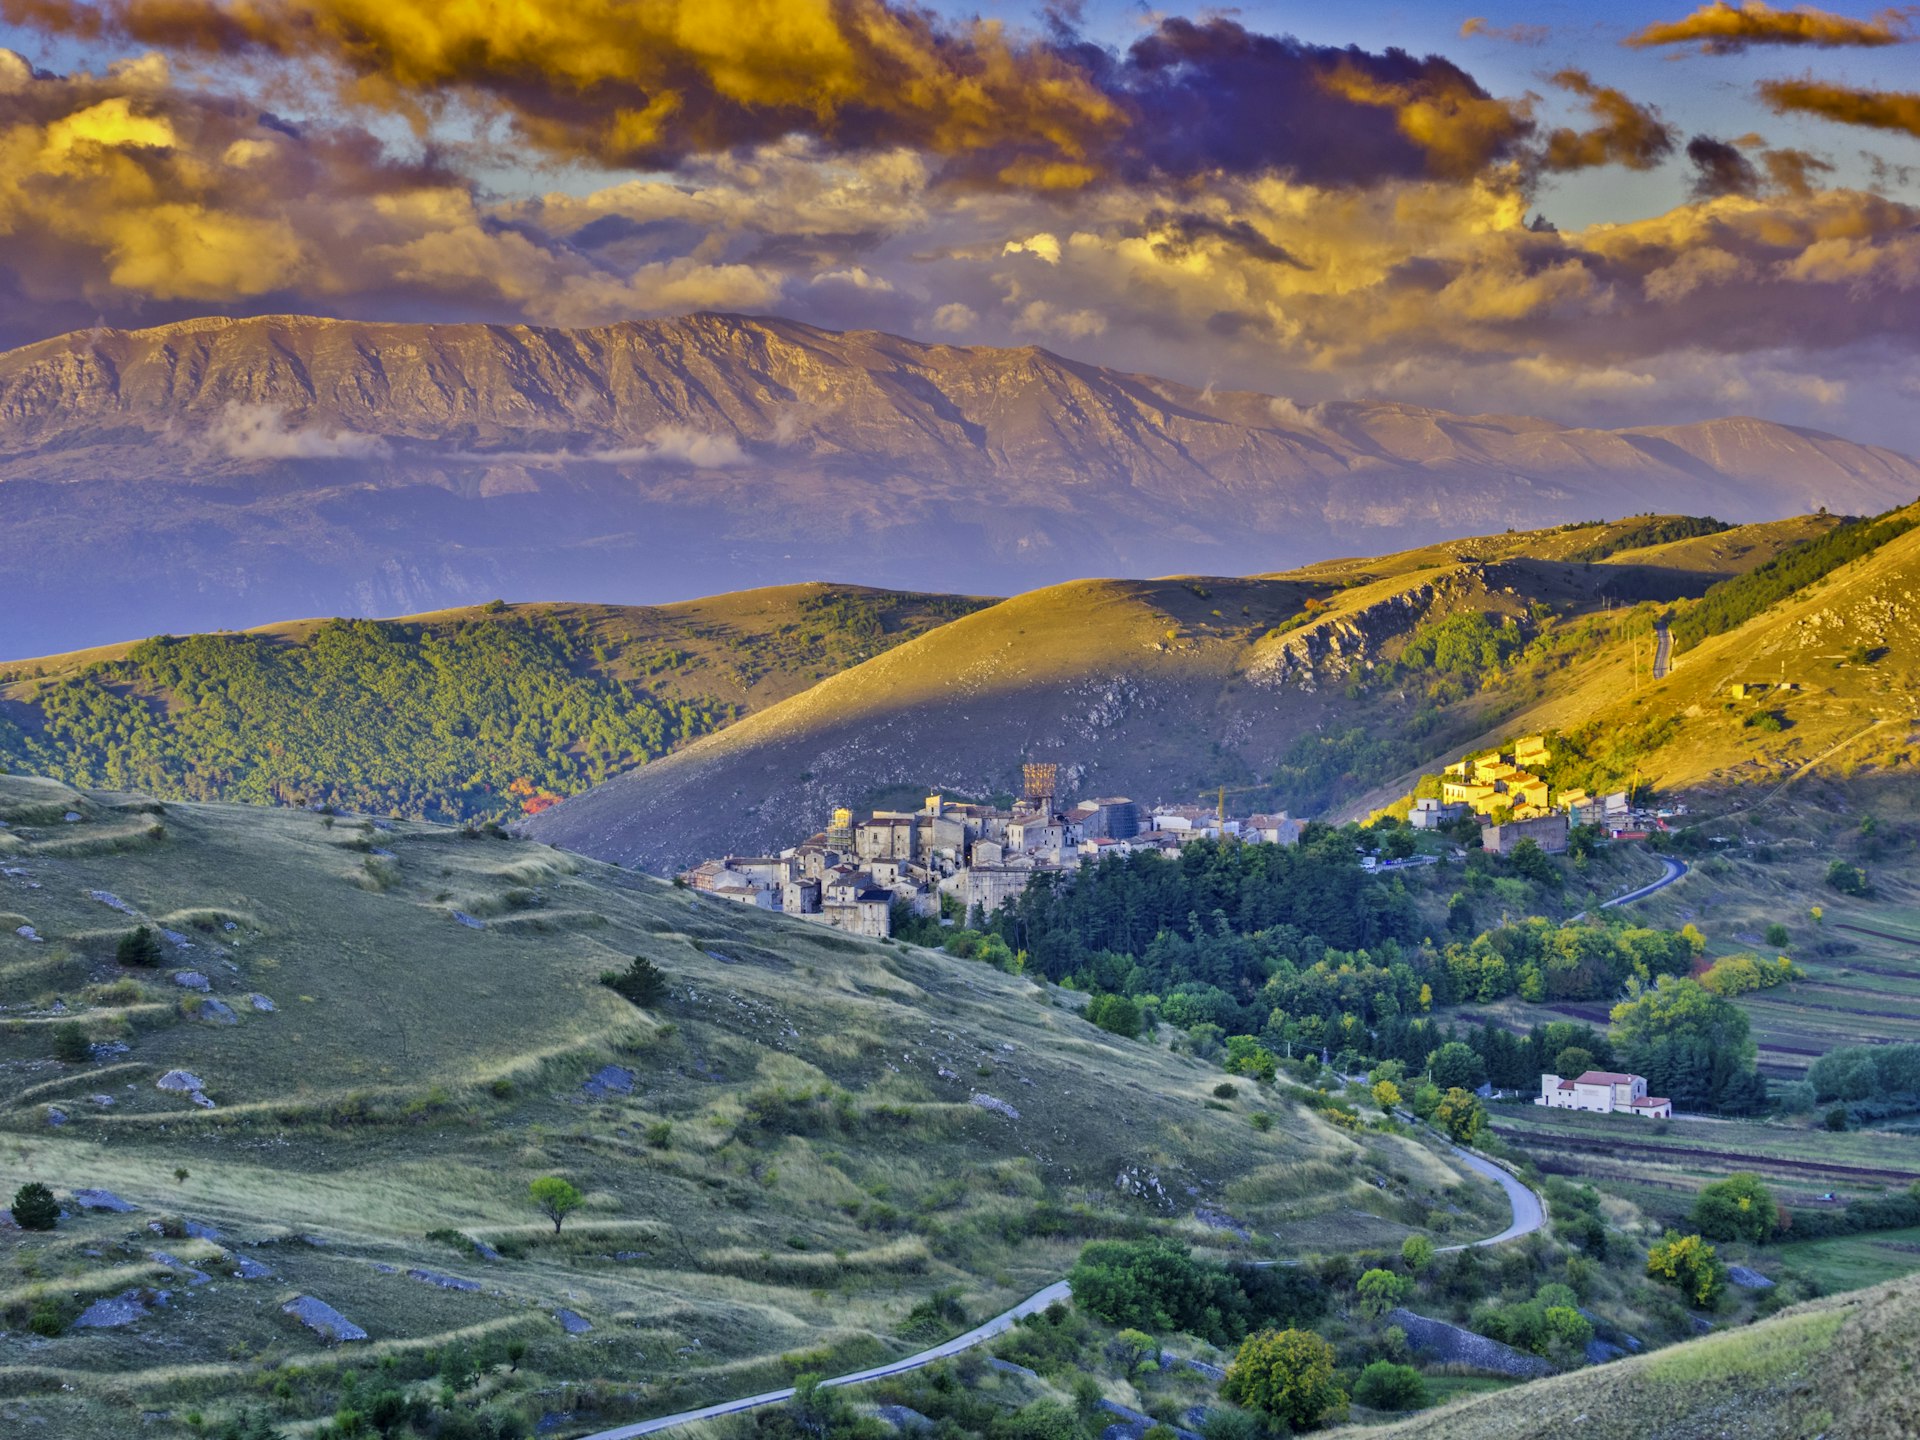 the small town of Santo Stefano di Sessanio is shown perched into a hillside in Abruzzo, Italy. All around the small town are rolling green hills, and, in the background, a set of towering mountains.